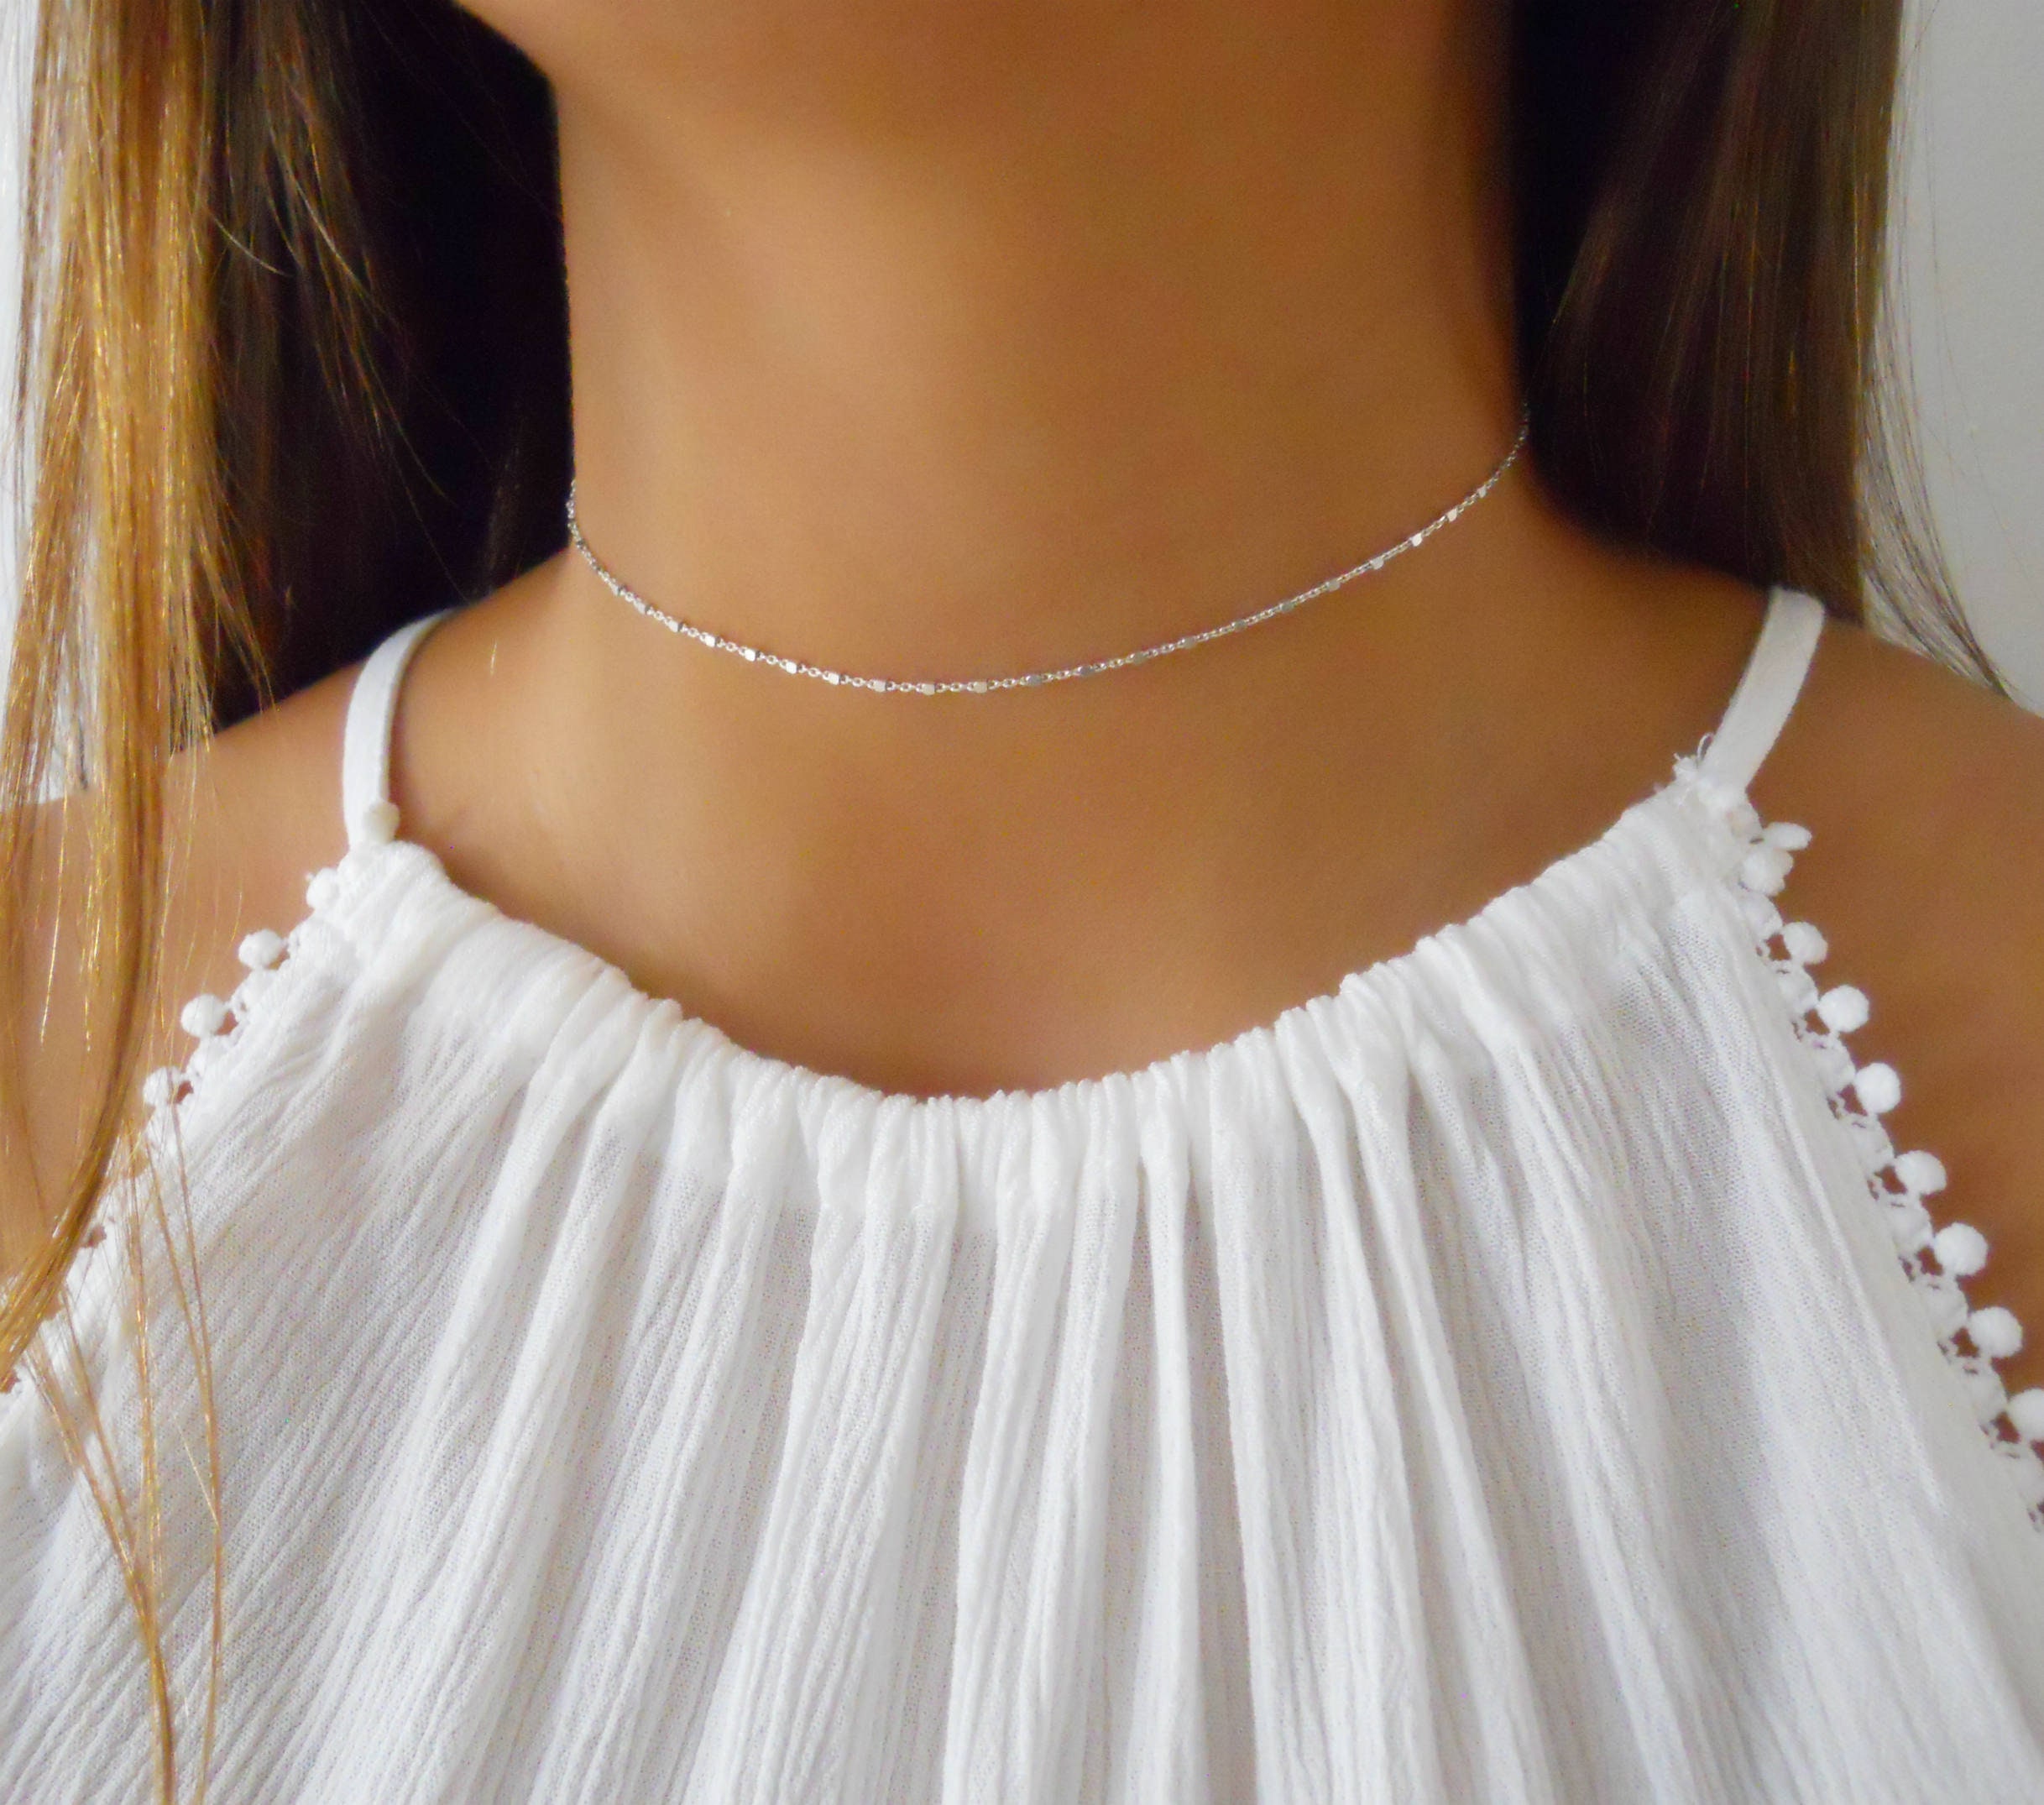 TOUS Chokers Silver 925 Silver Choker Necklaces 